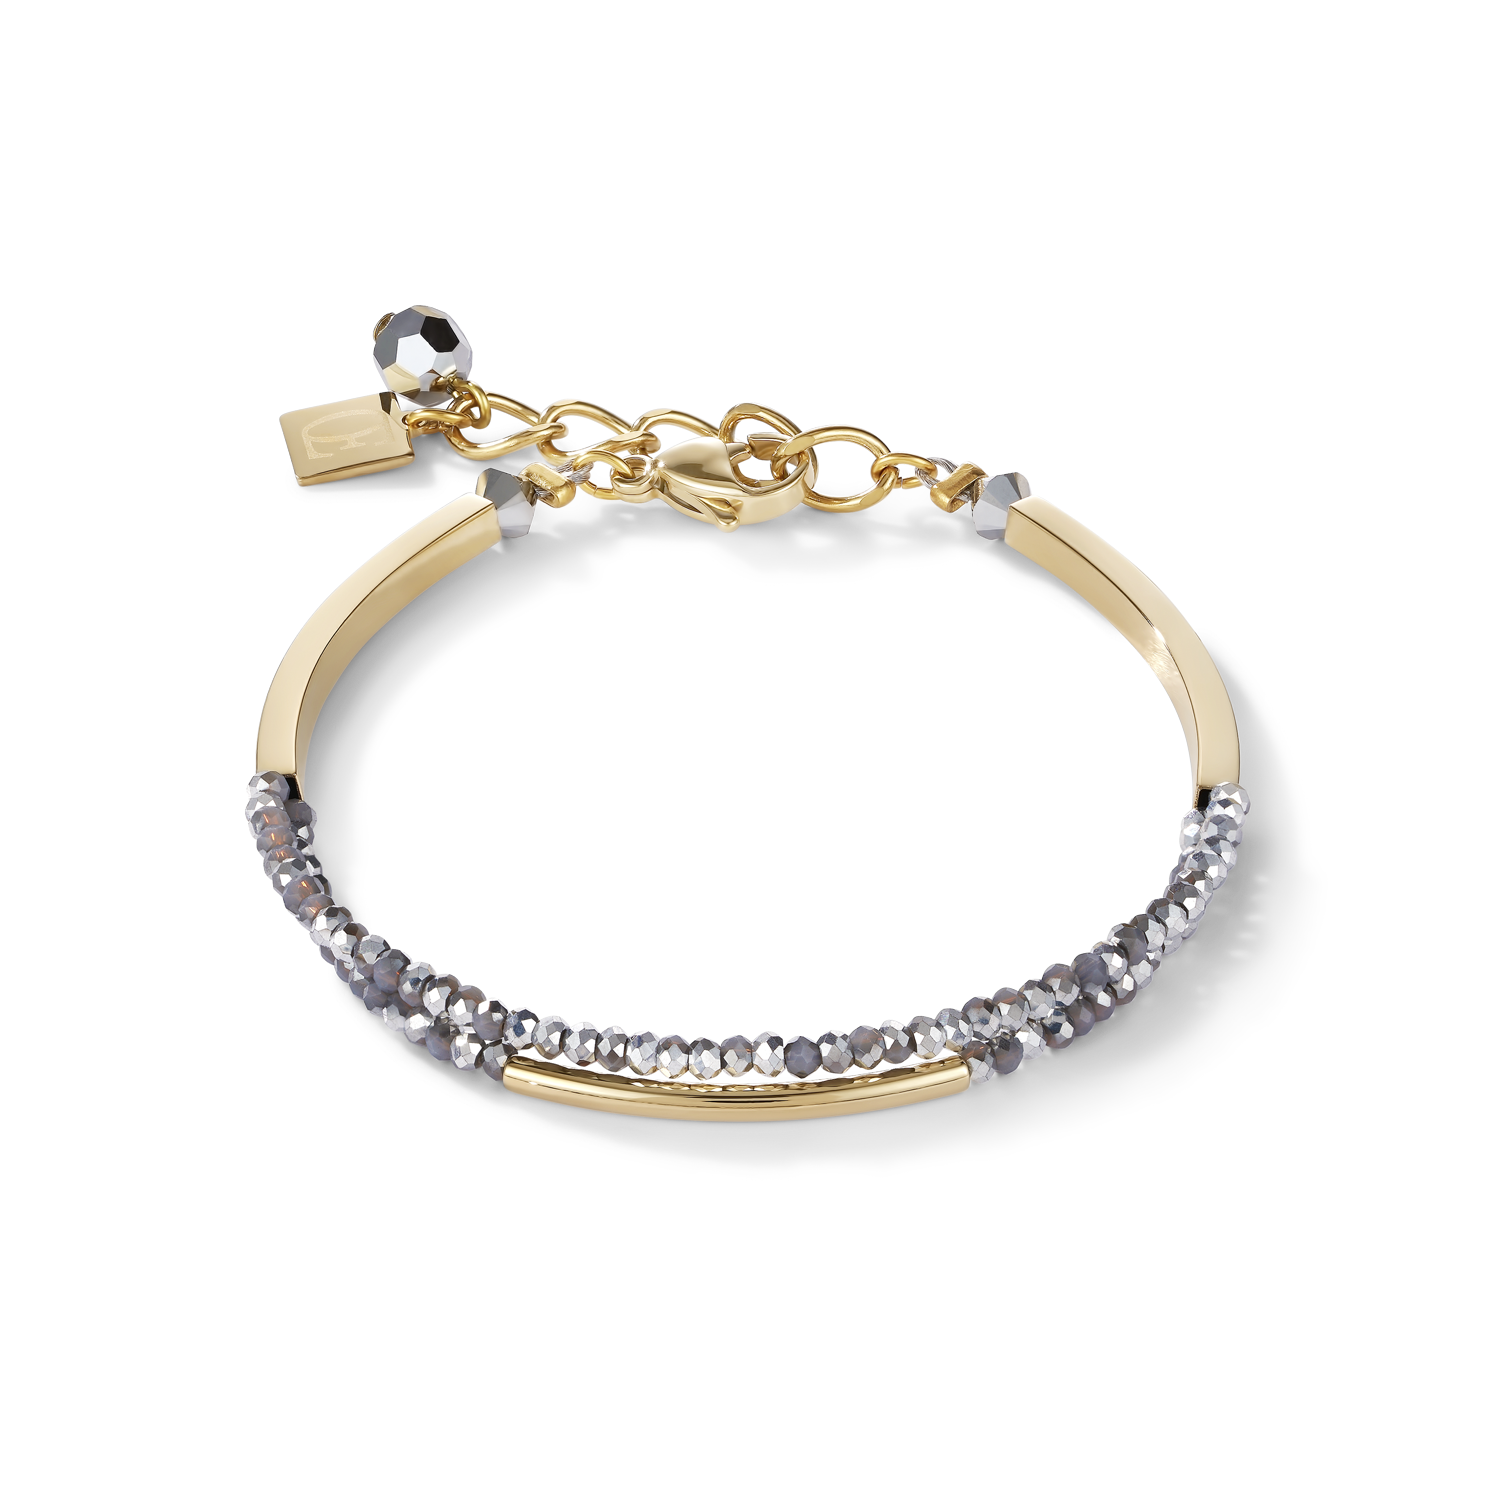 Bracelet Waterfall small stainless steel gold & glass silver